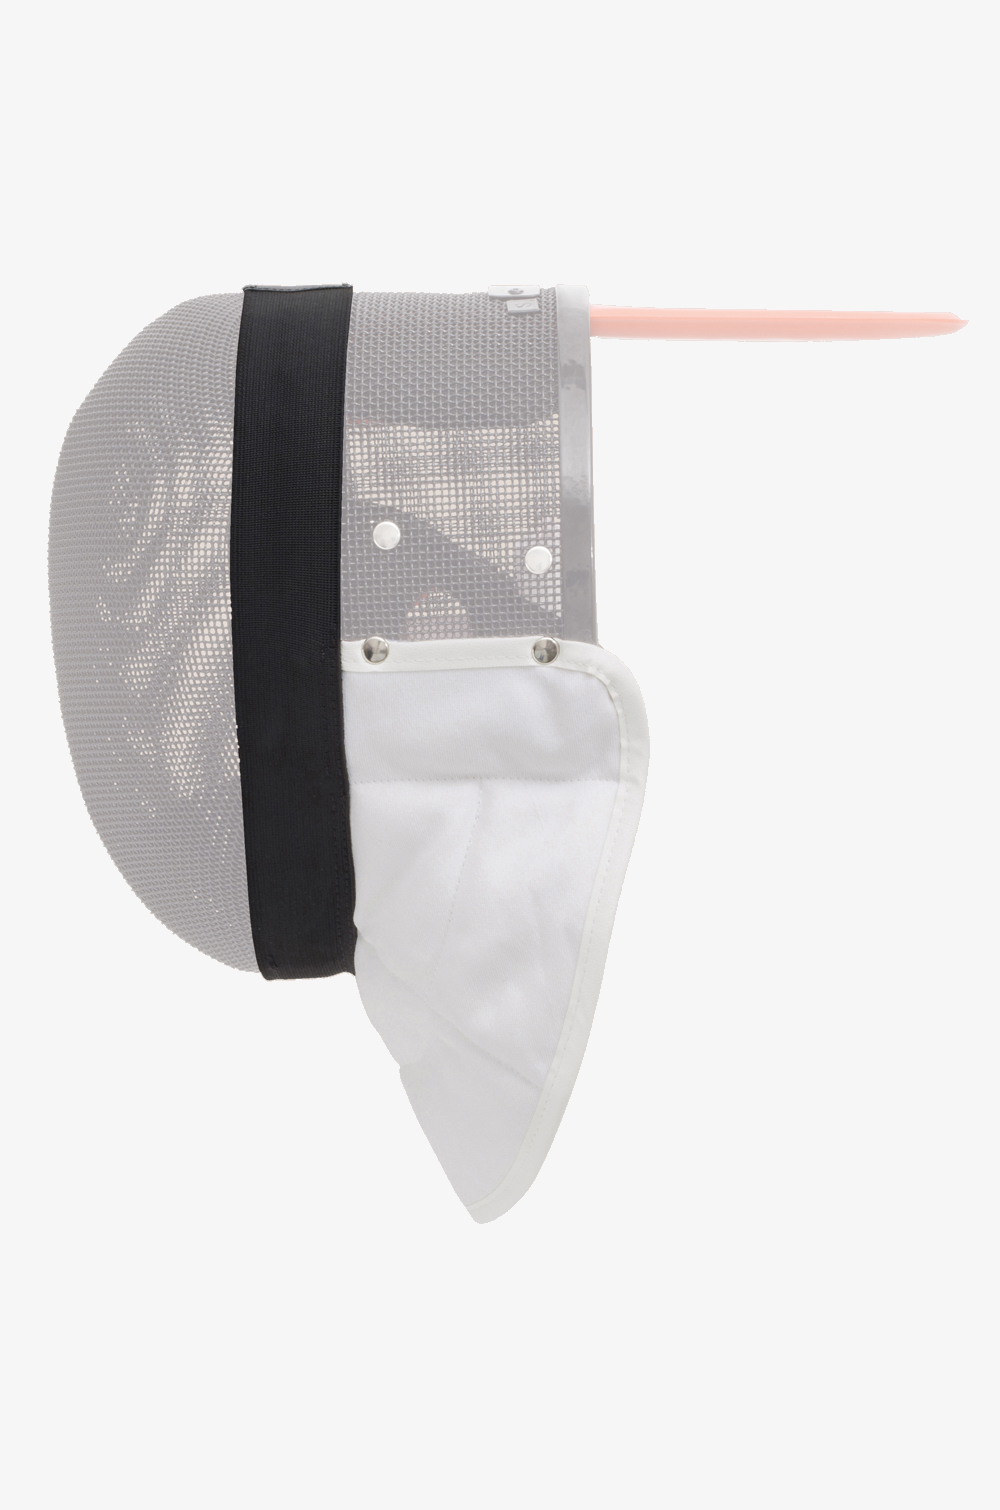 Replacement of the Bib FIE Epee Mask